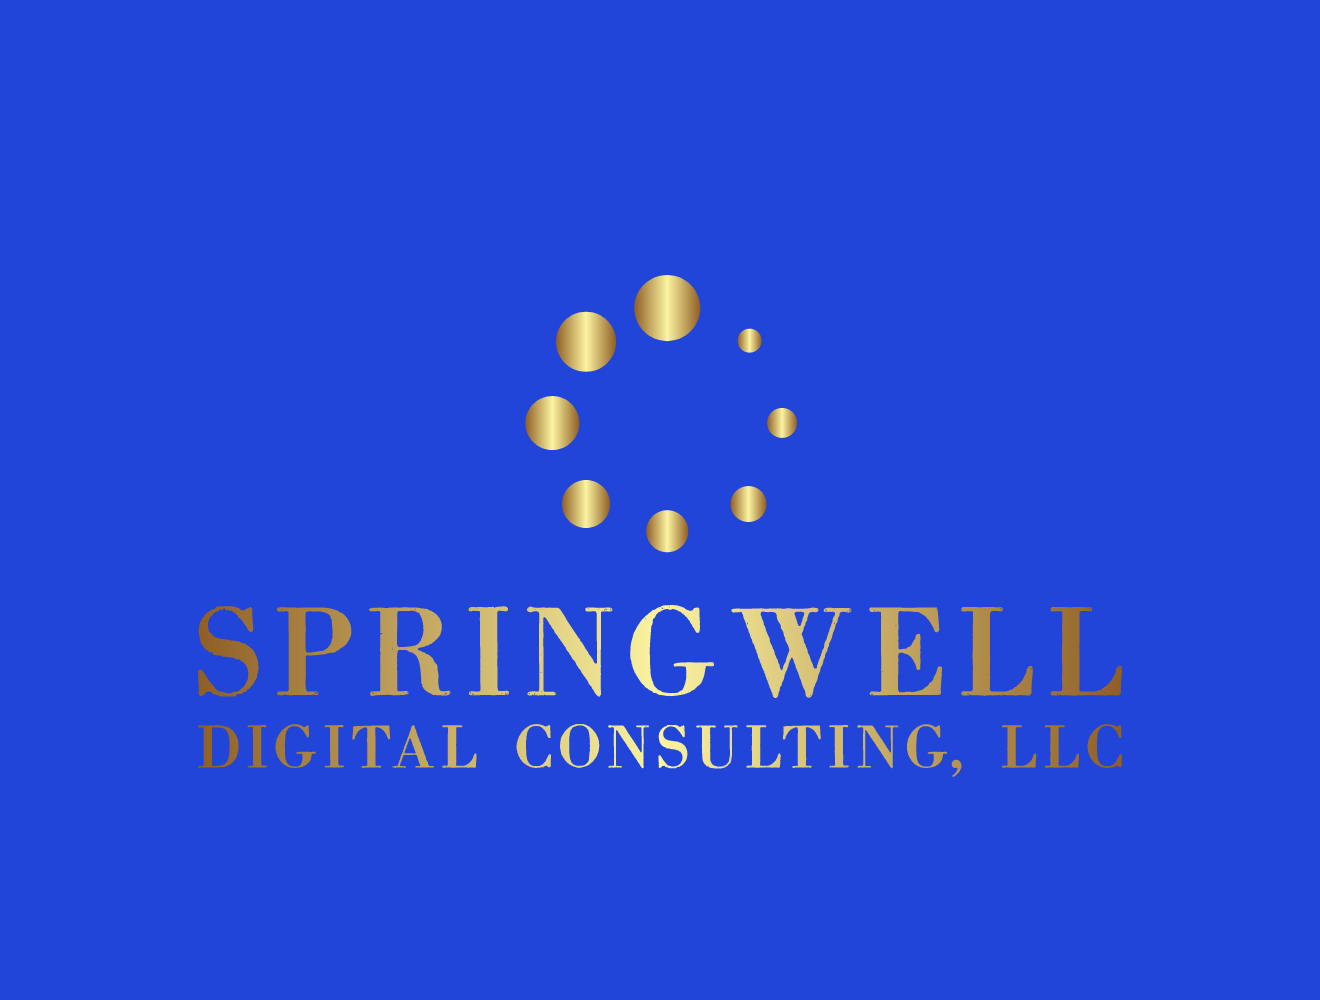 Springwell Digital Consulting